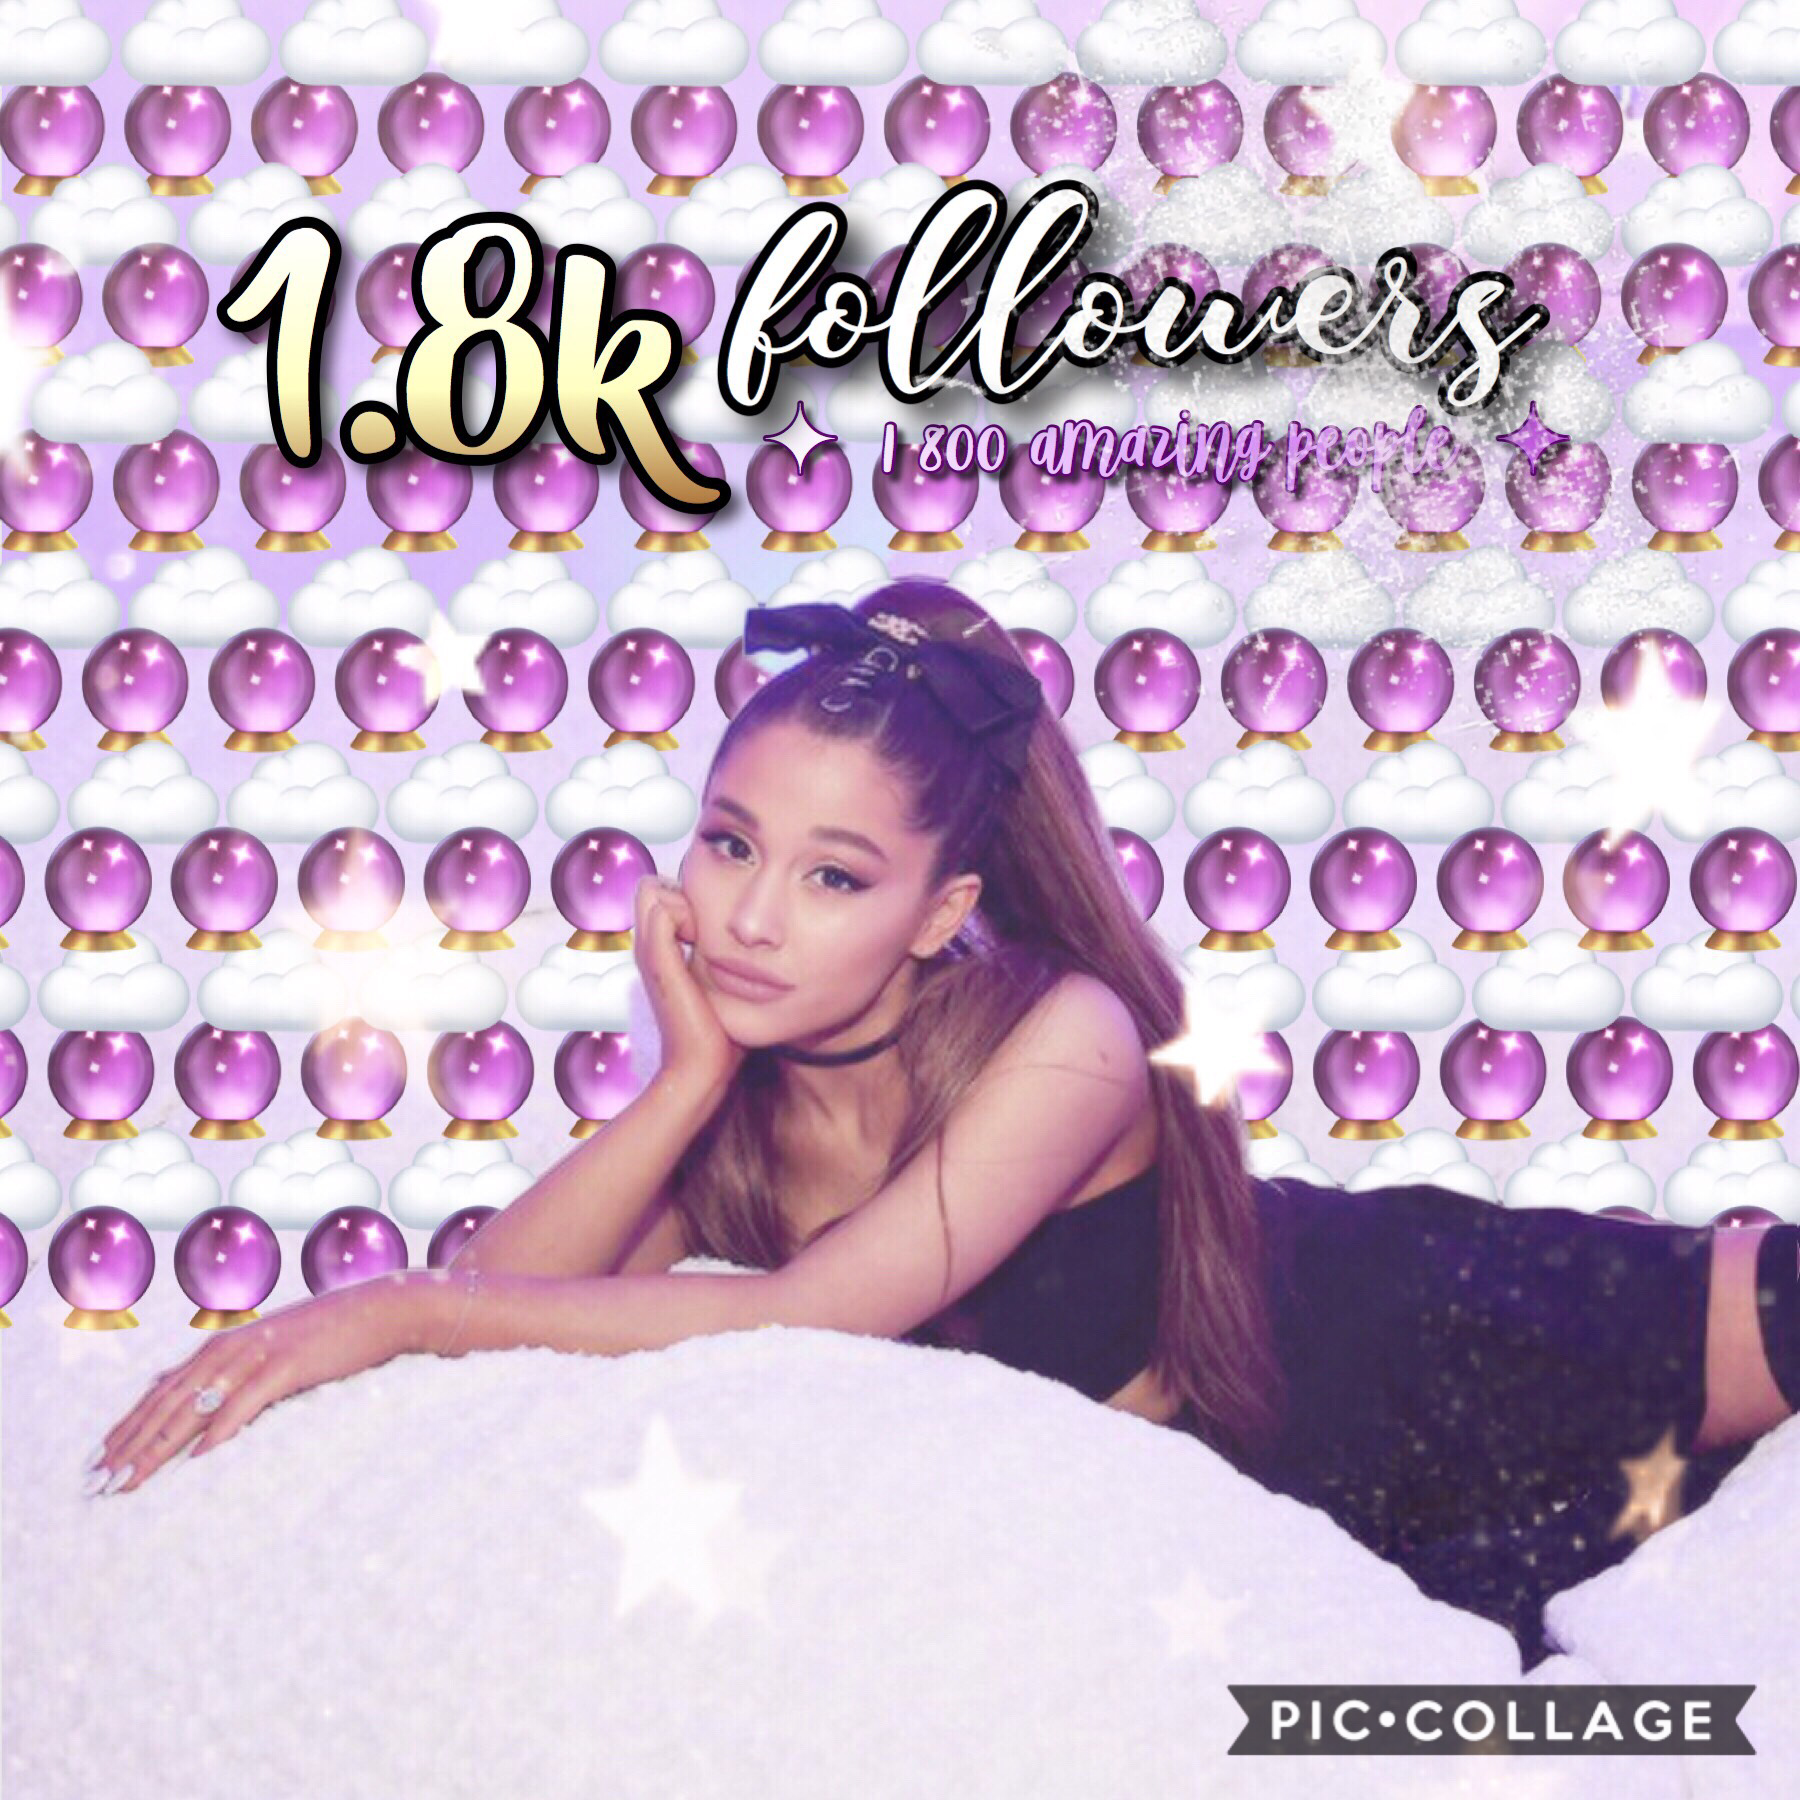 oh my gooossshhhh tysm guyyysss!🎉we hit it! thanks for surprising me, ‘cause girl, IT WORKEDDD 😱🤣 sorry for this awful edit😣 tho STILL, ITS IN THE THEME🔮👌
1 800+ amazing people took a moment to press that follow button and to them all, I heart you so much